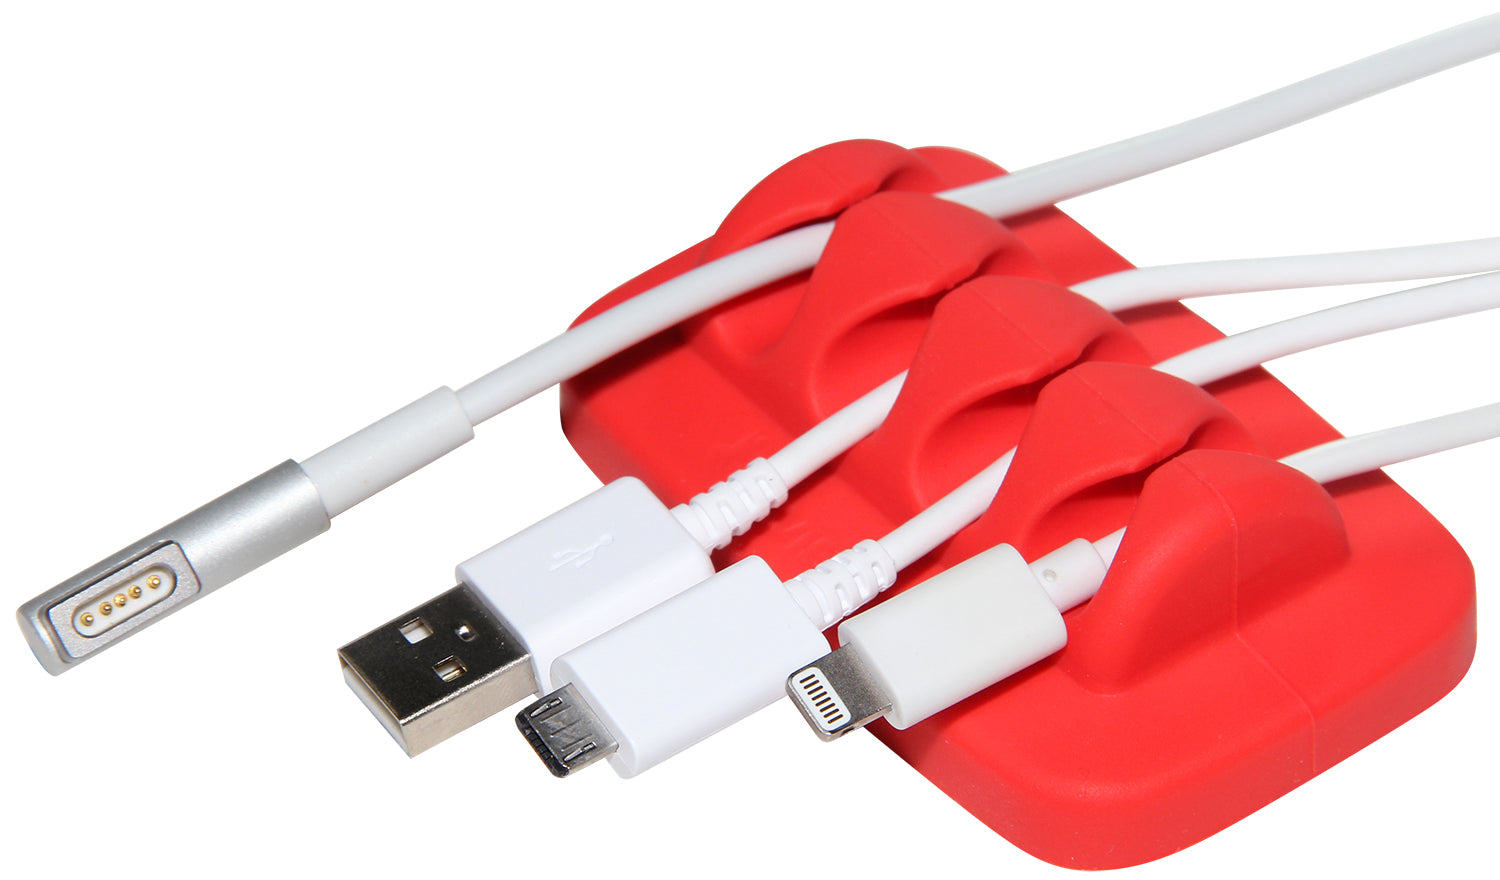 Weighted Desktop Cable Organizer - One Size Openings, Bundled with 4 Cable Ties